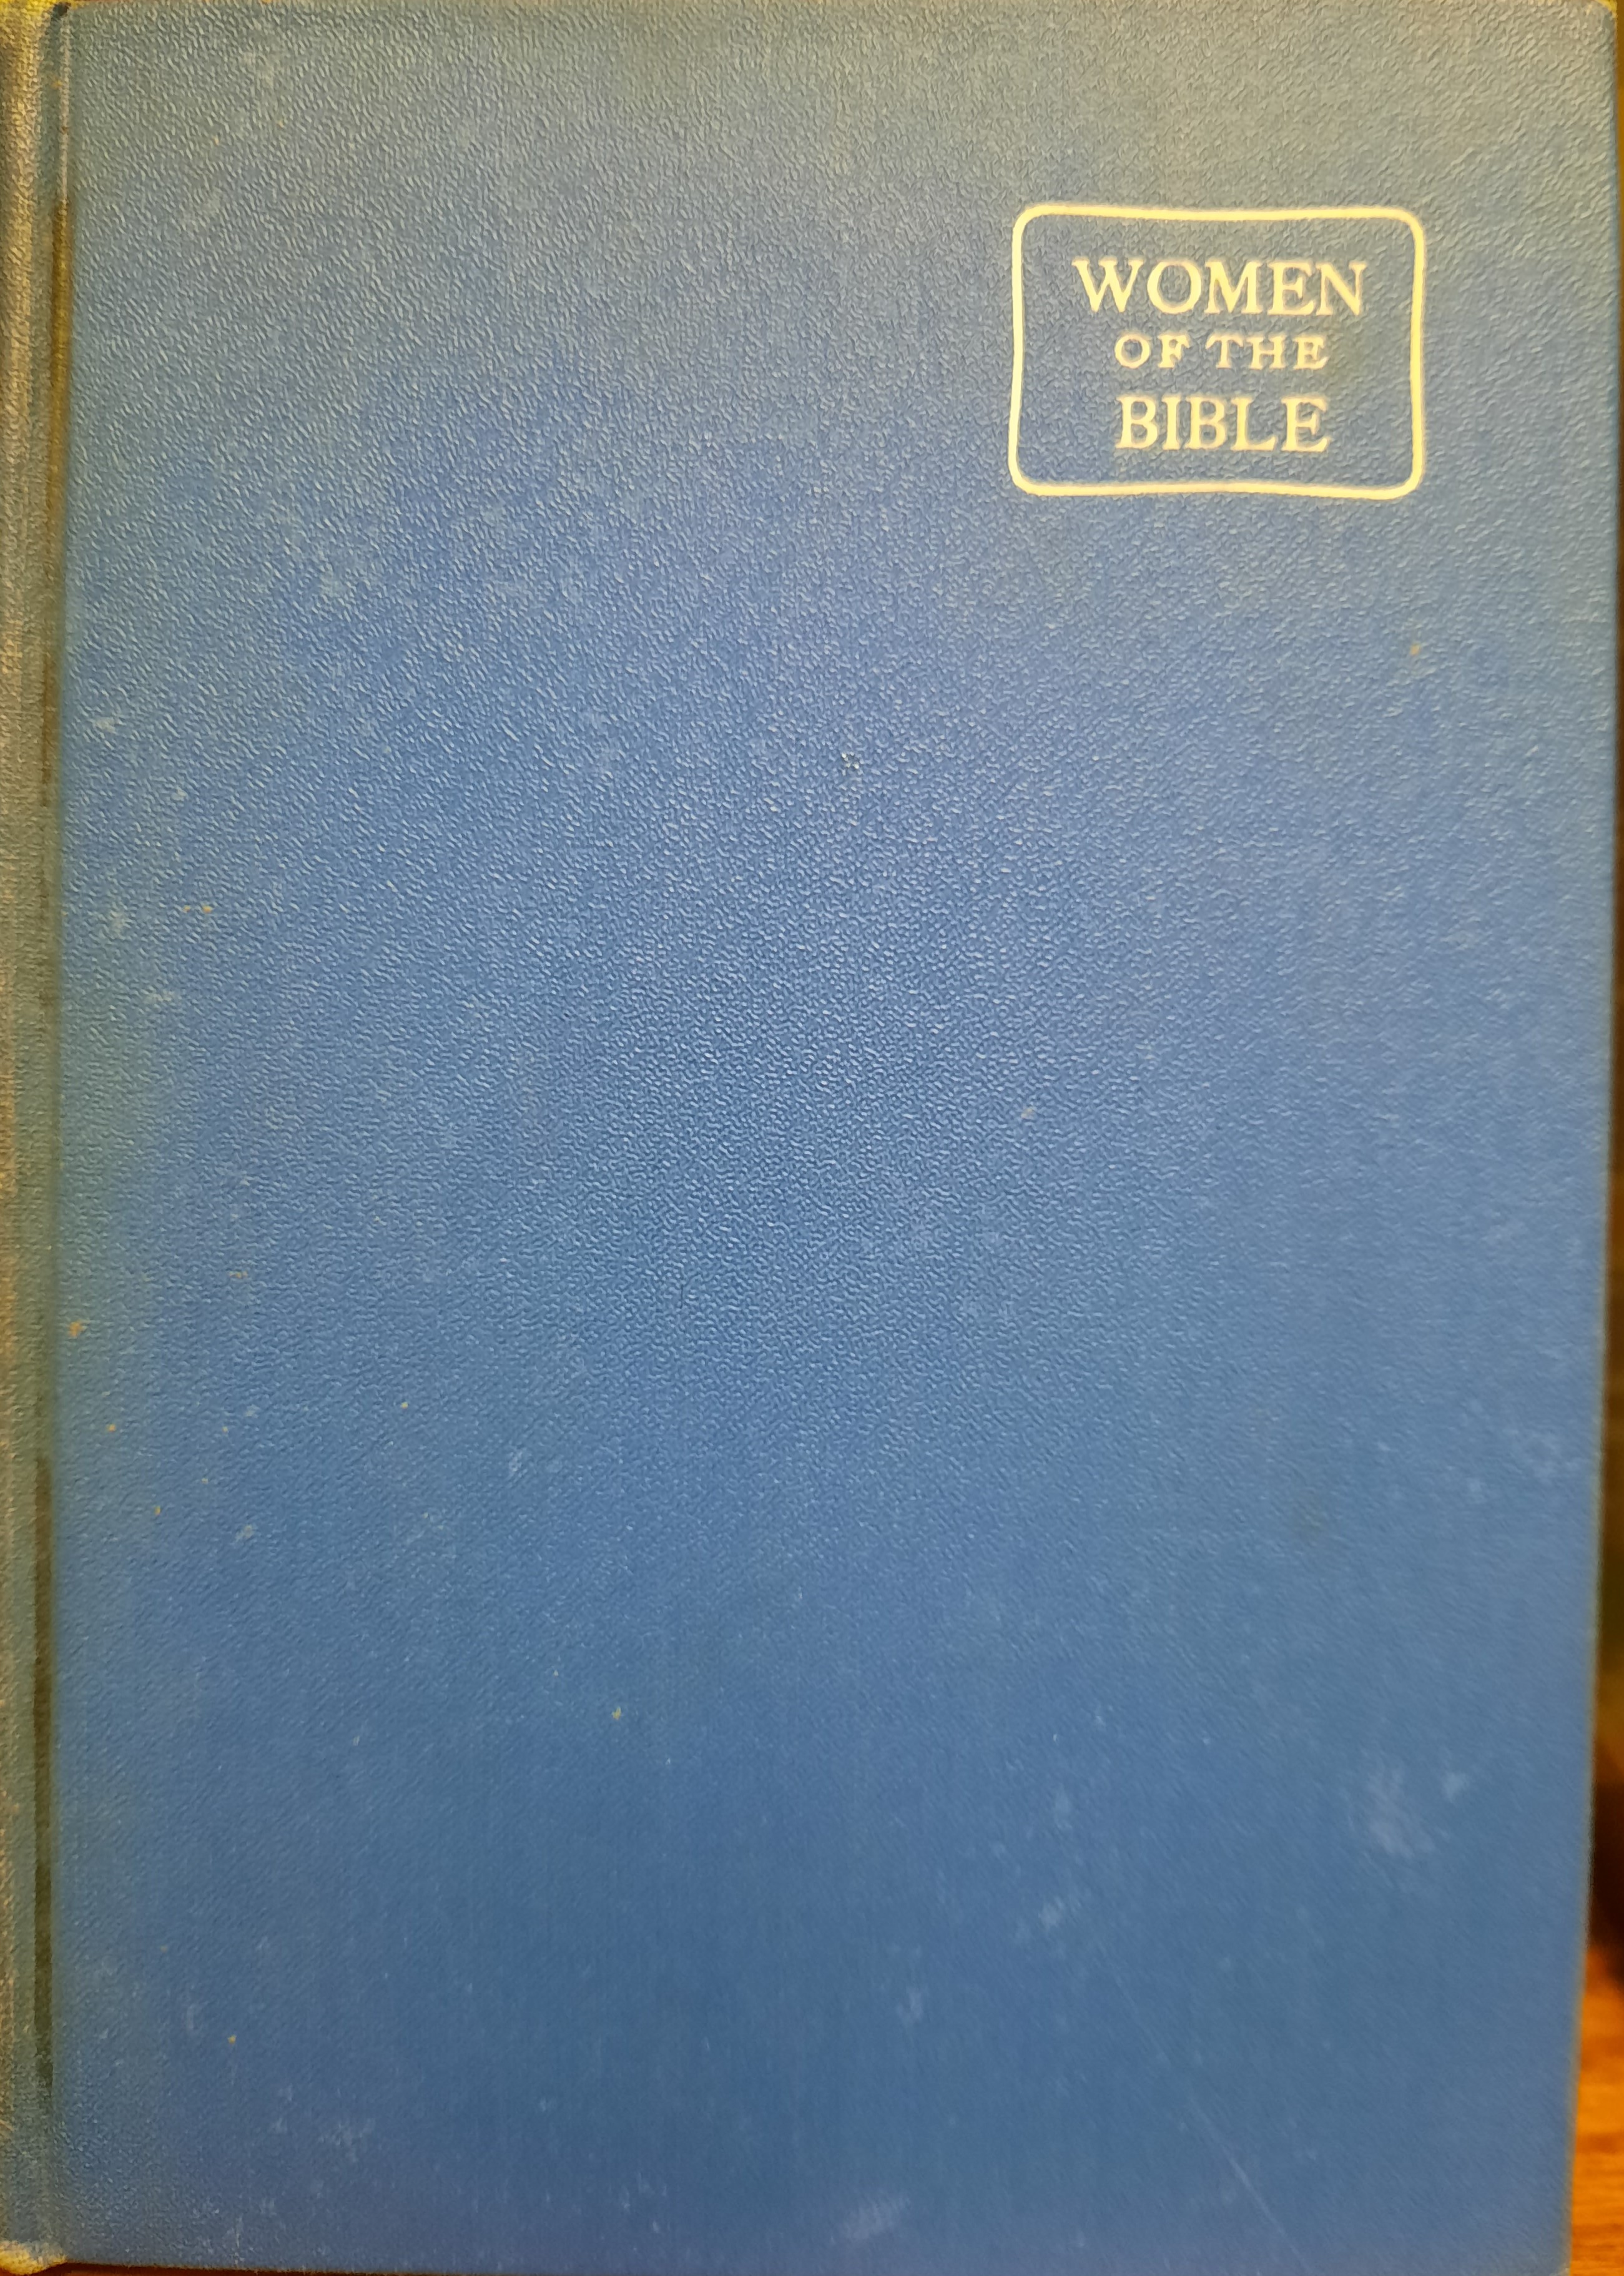 Women of the Bible Vol. 1 Old Testament